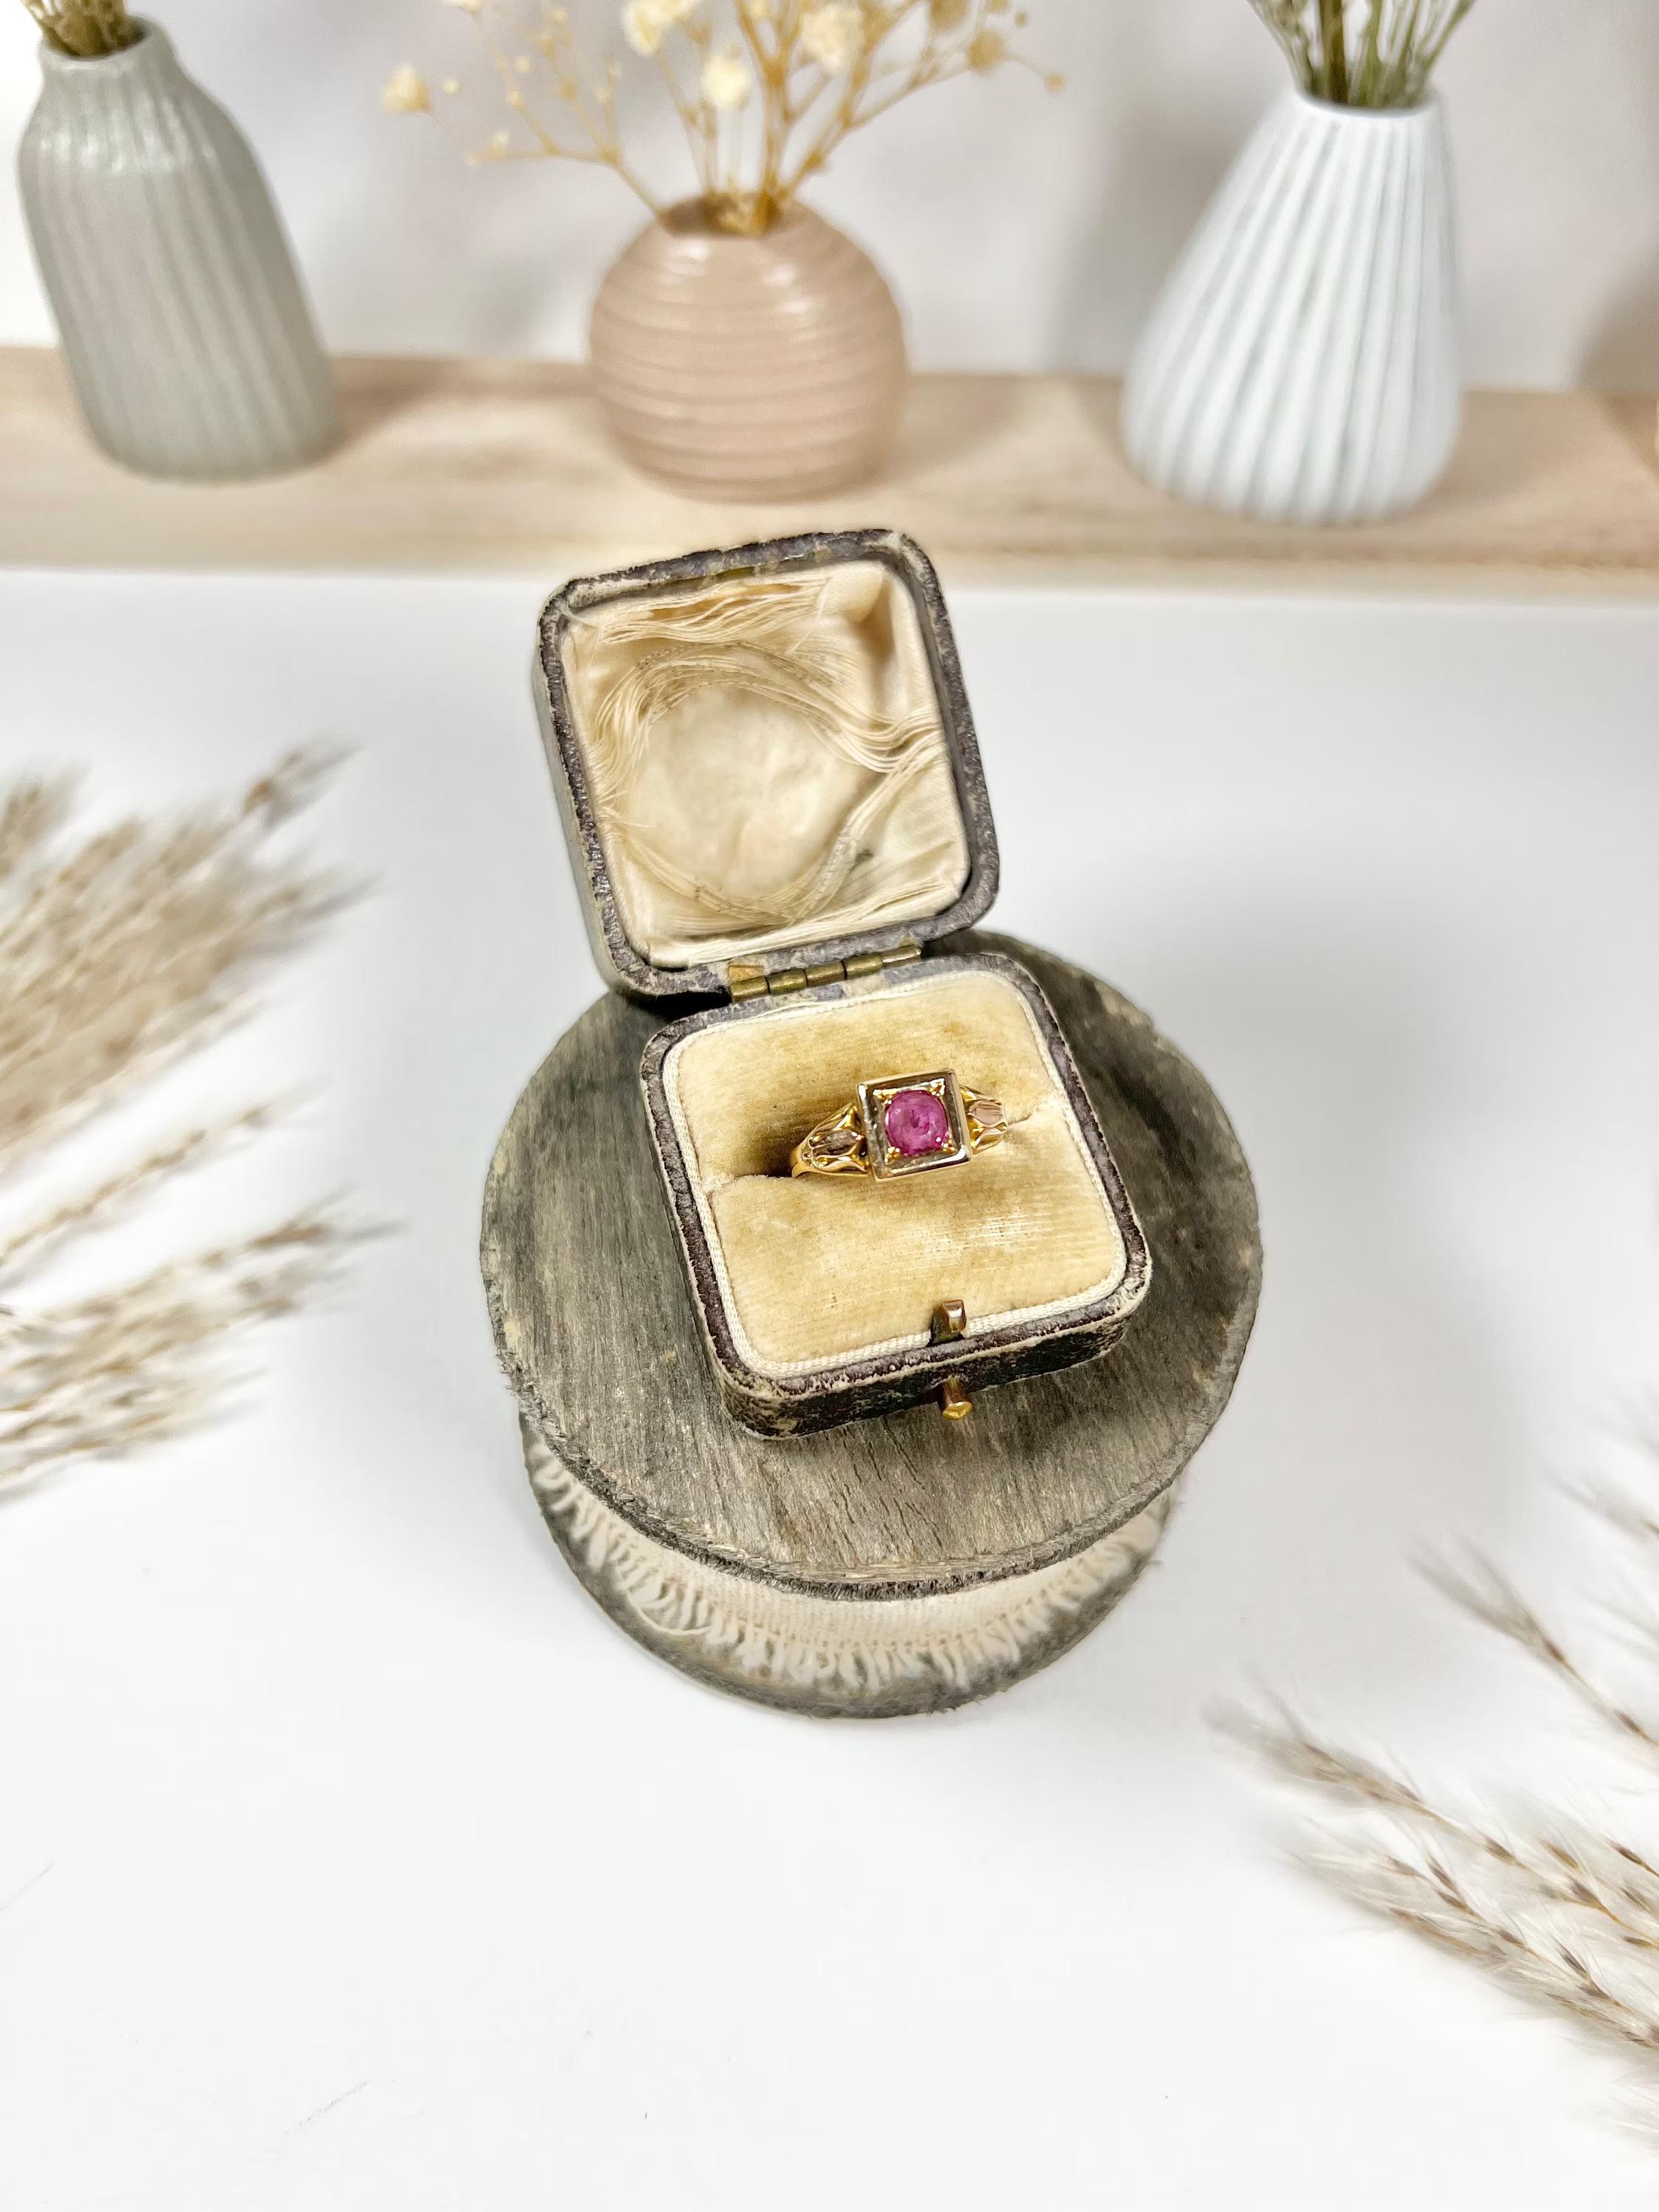 Antique Ruby Ring

22ct Gold Stamped 

Hallmarked London 1879

Pretty, Victorian square shaped ring. Set with a lovely round, natural ruby centre. Mounted in yellow gold with tulip carved shoulders.

Face of the ring measures approx 8mm x 8mm

UK